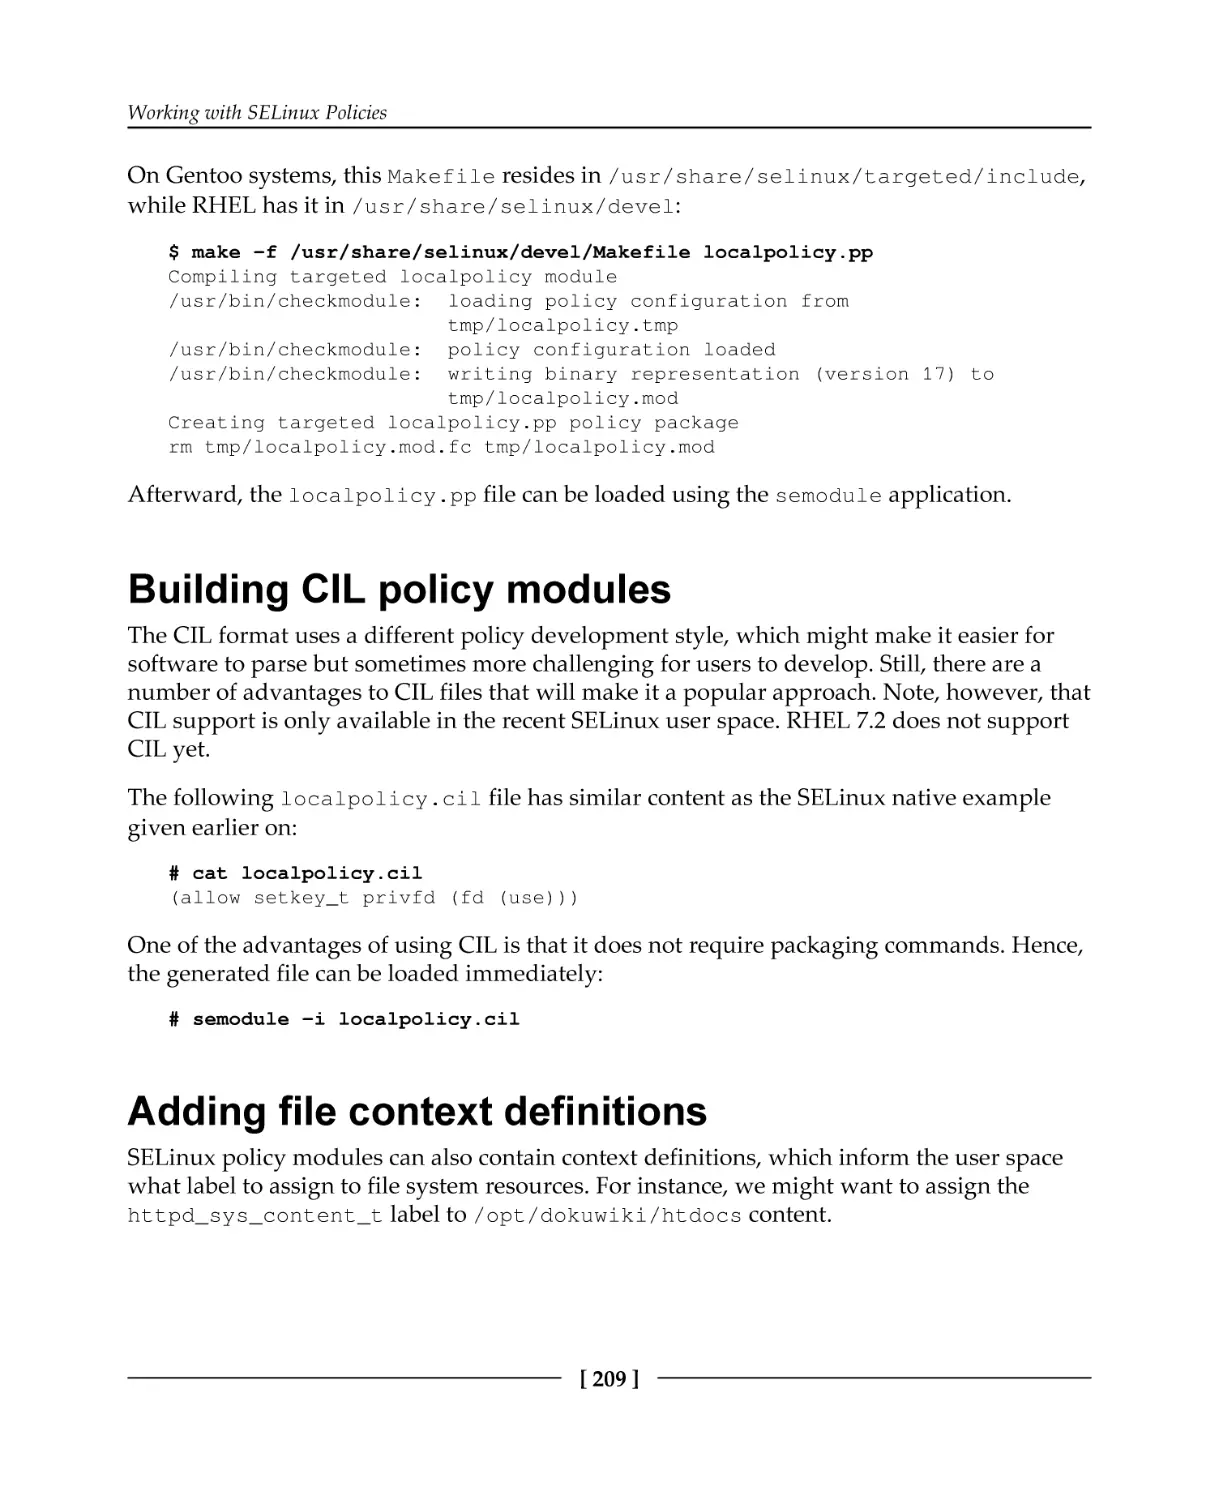 Building CIL policy modules
Adding file context definitions